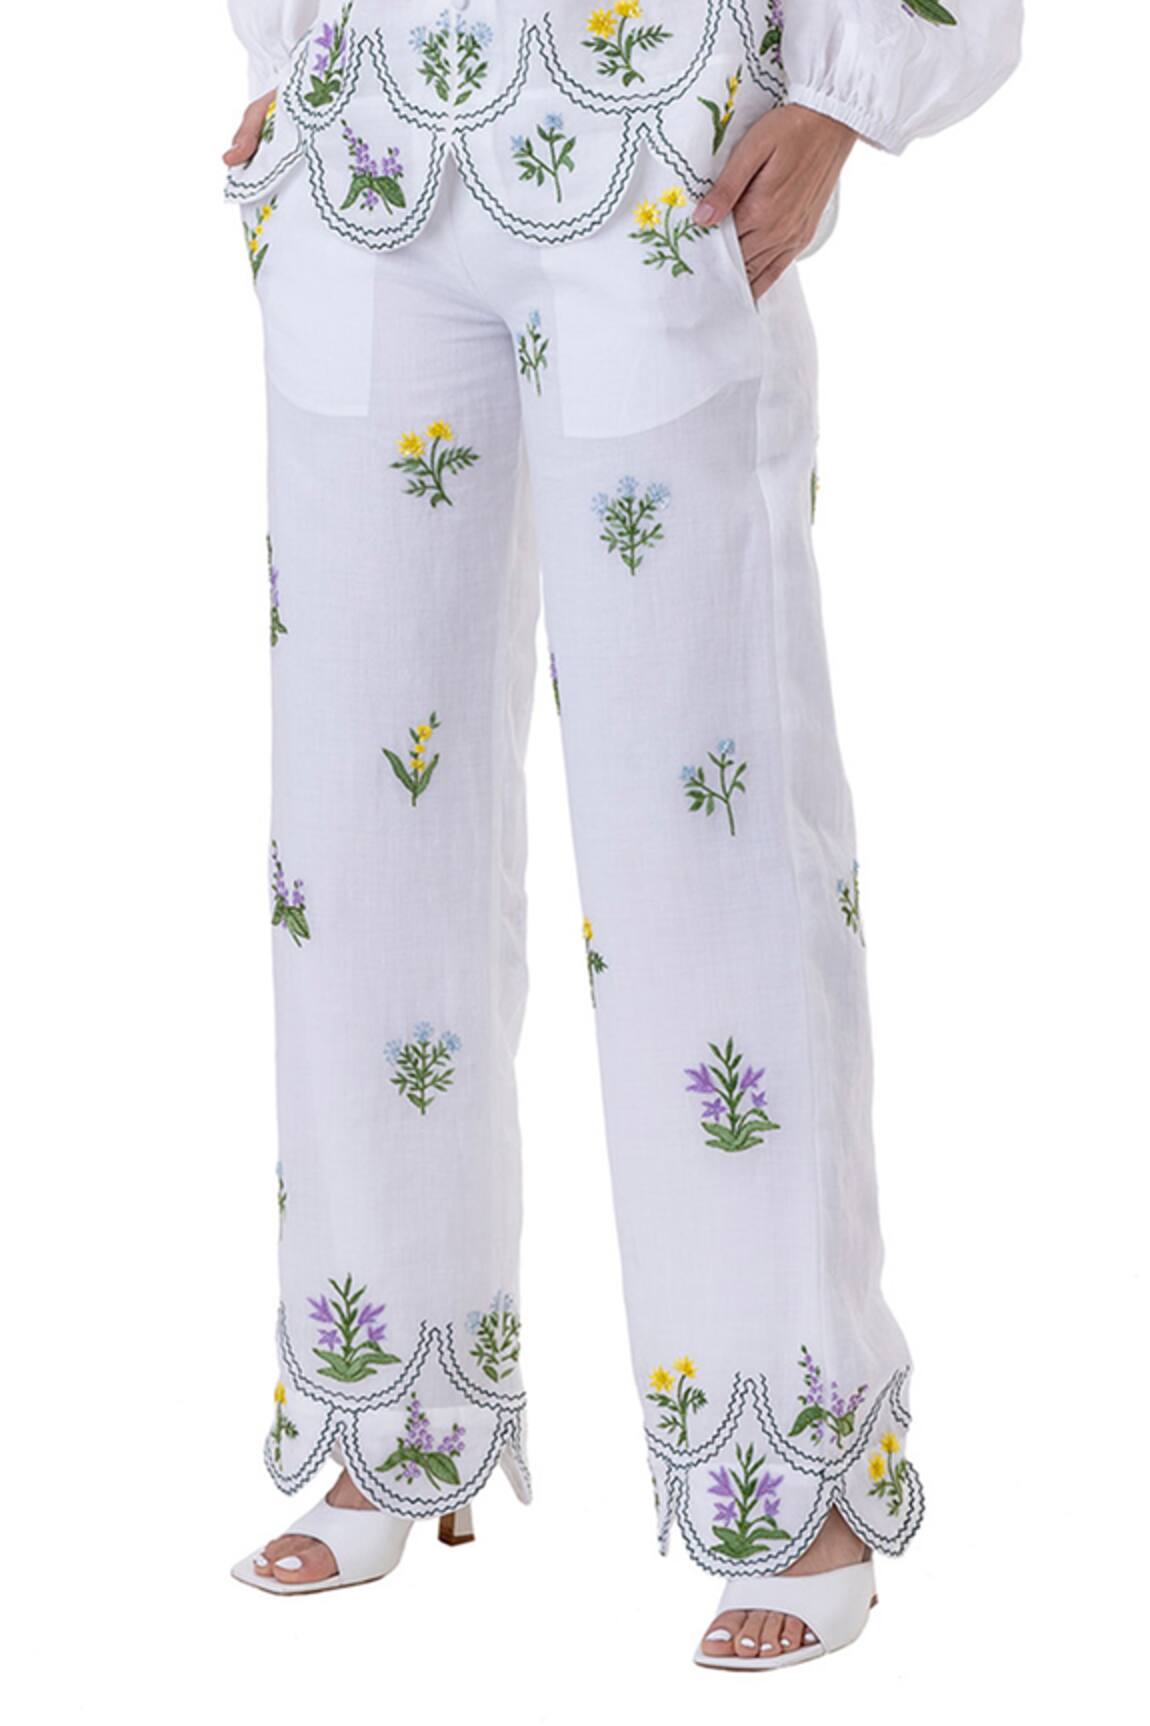 Rida Fashions Ladies Hand Embroidered Pants Occasion  Casual Wear at Rs  750  Piece in Lucknow